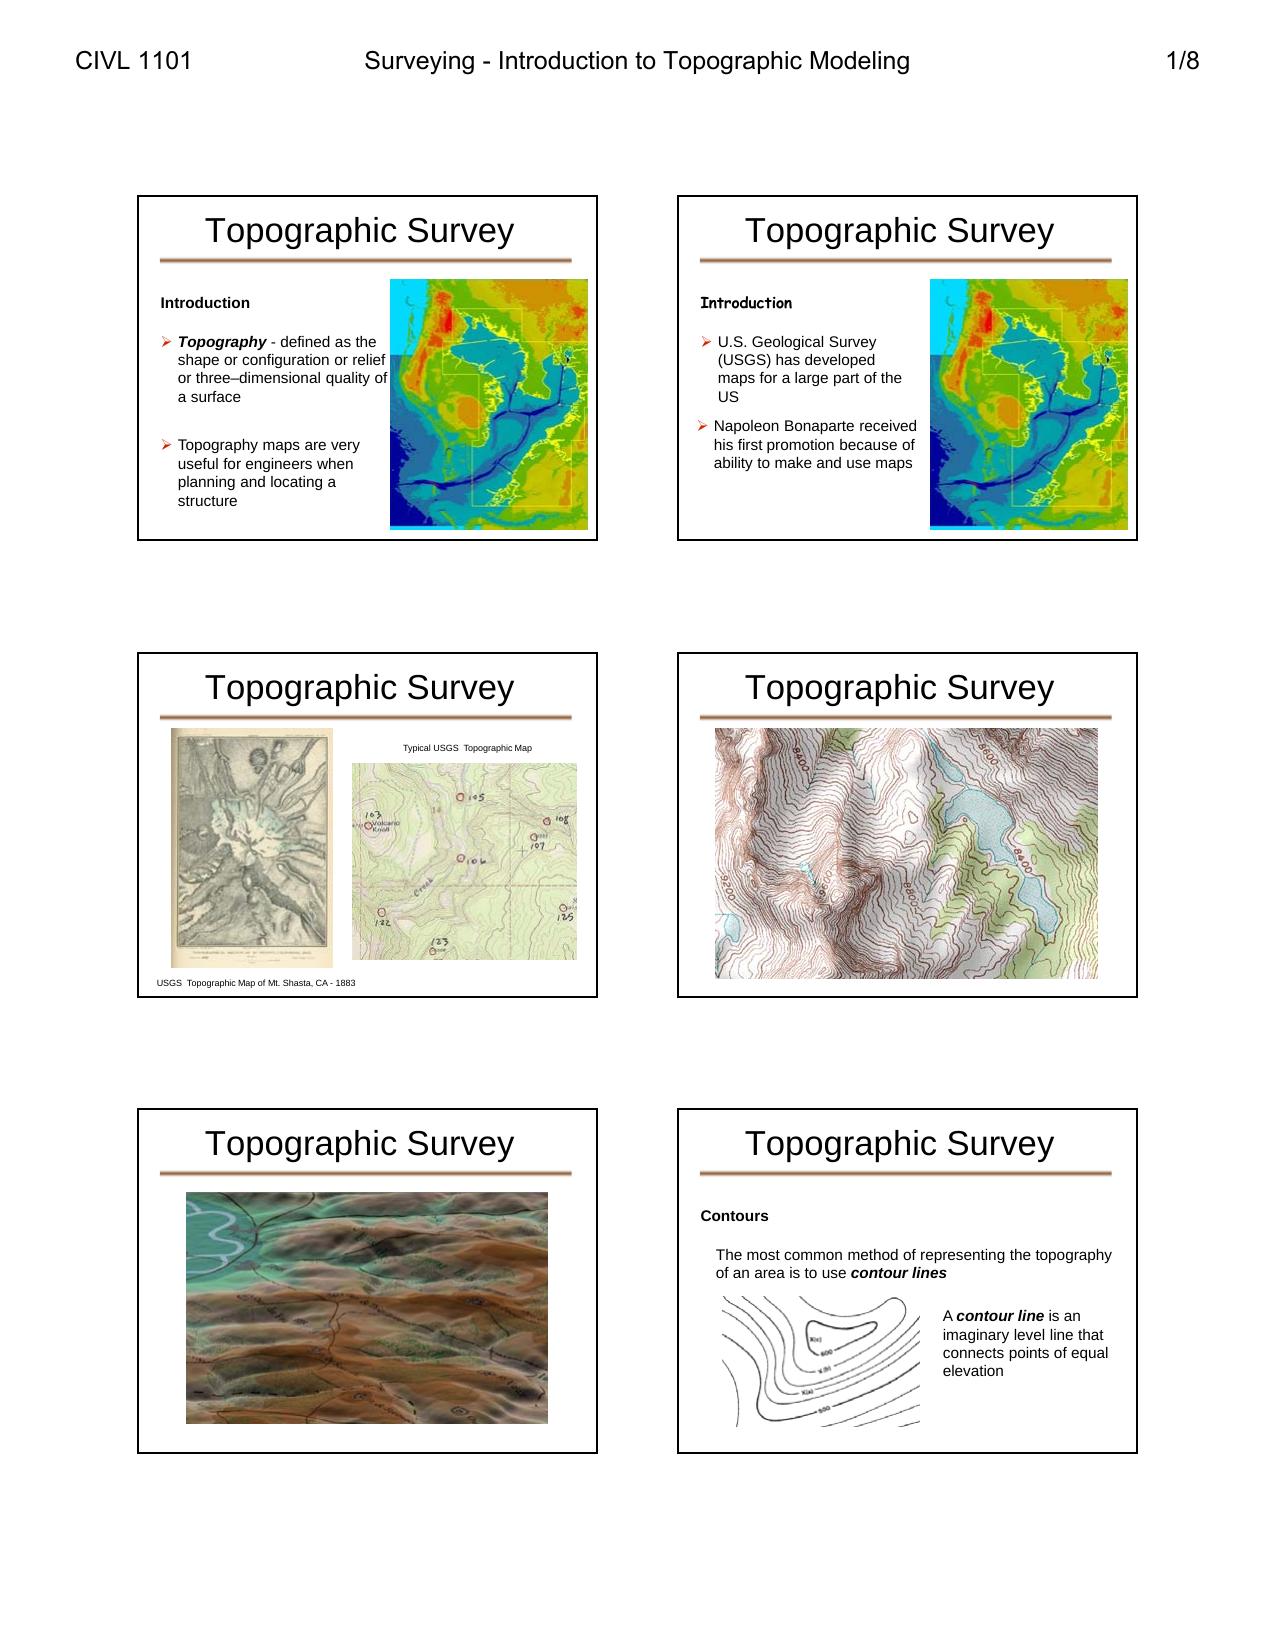 Microsoft PowerPoint - Surveying - 5 - topographic modeling.ppt [Compatibility Mode]